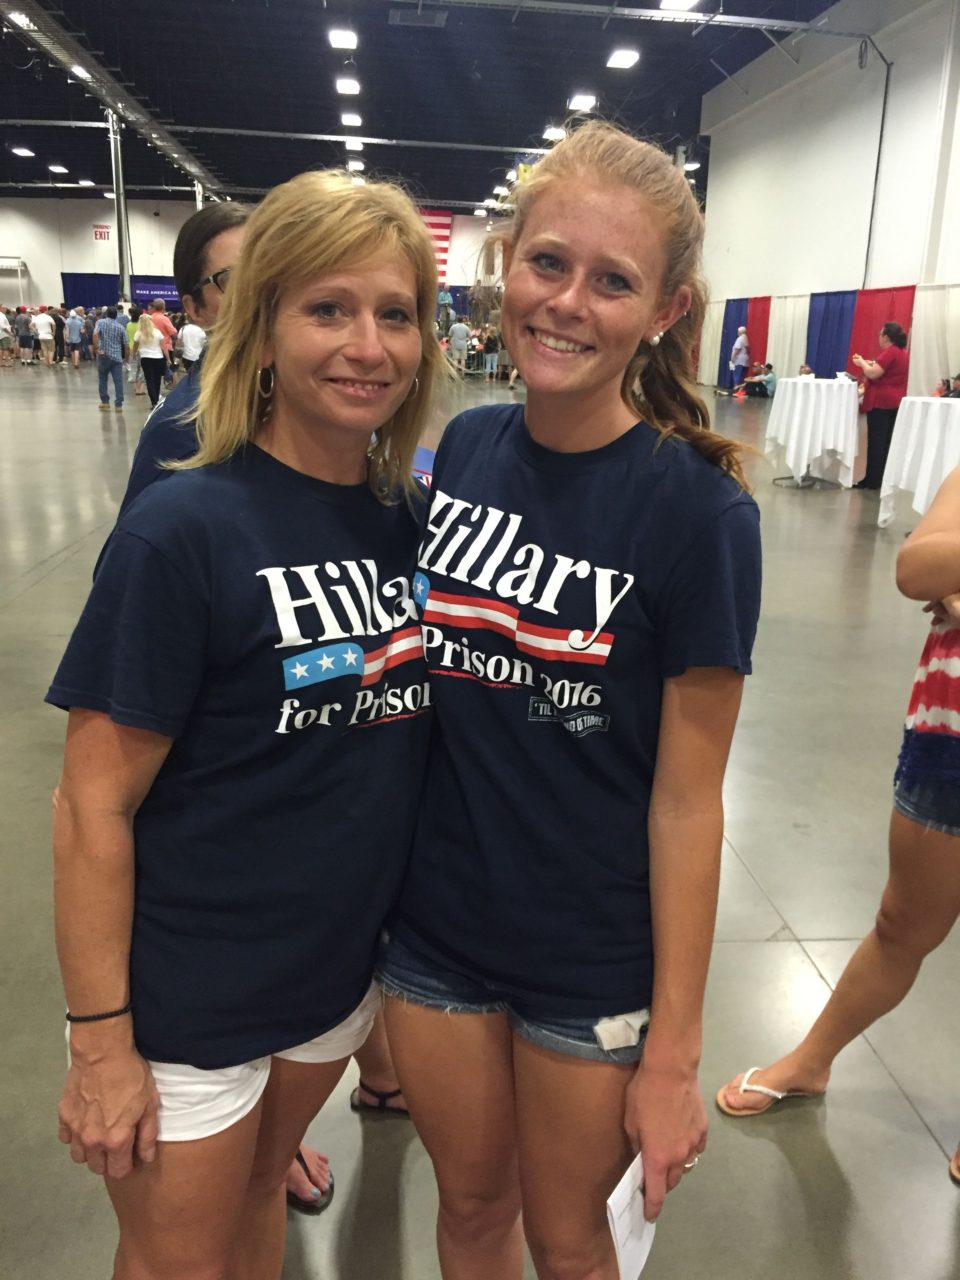 Two girls in Hillary For Prison shirts